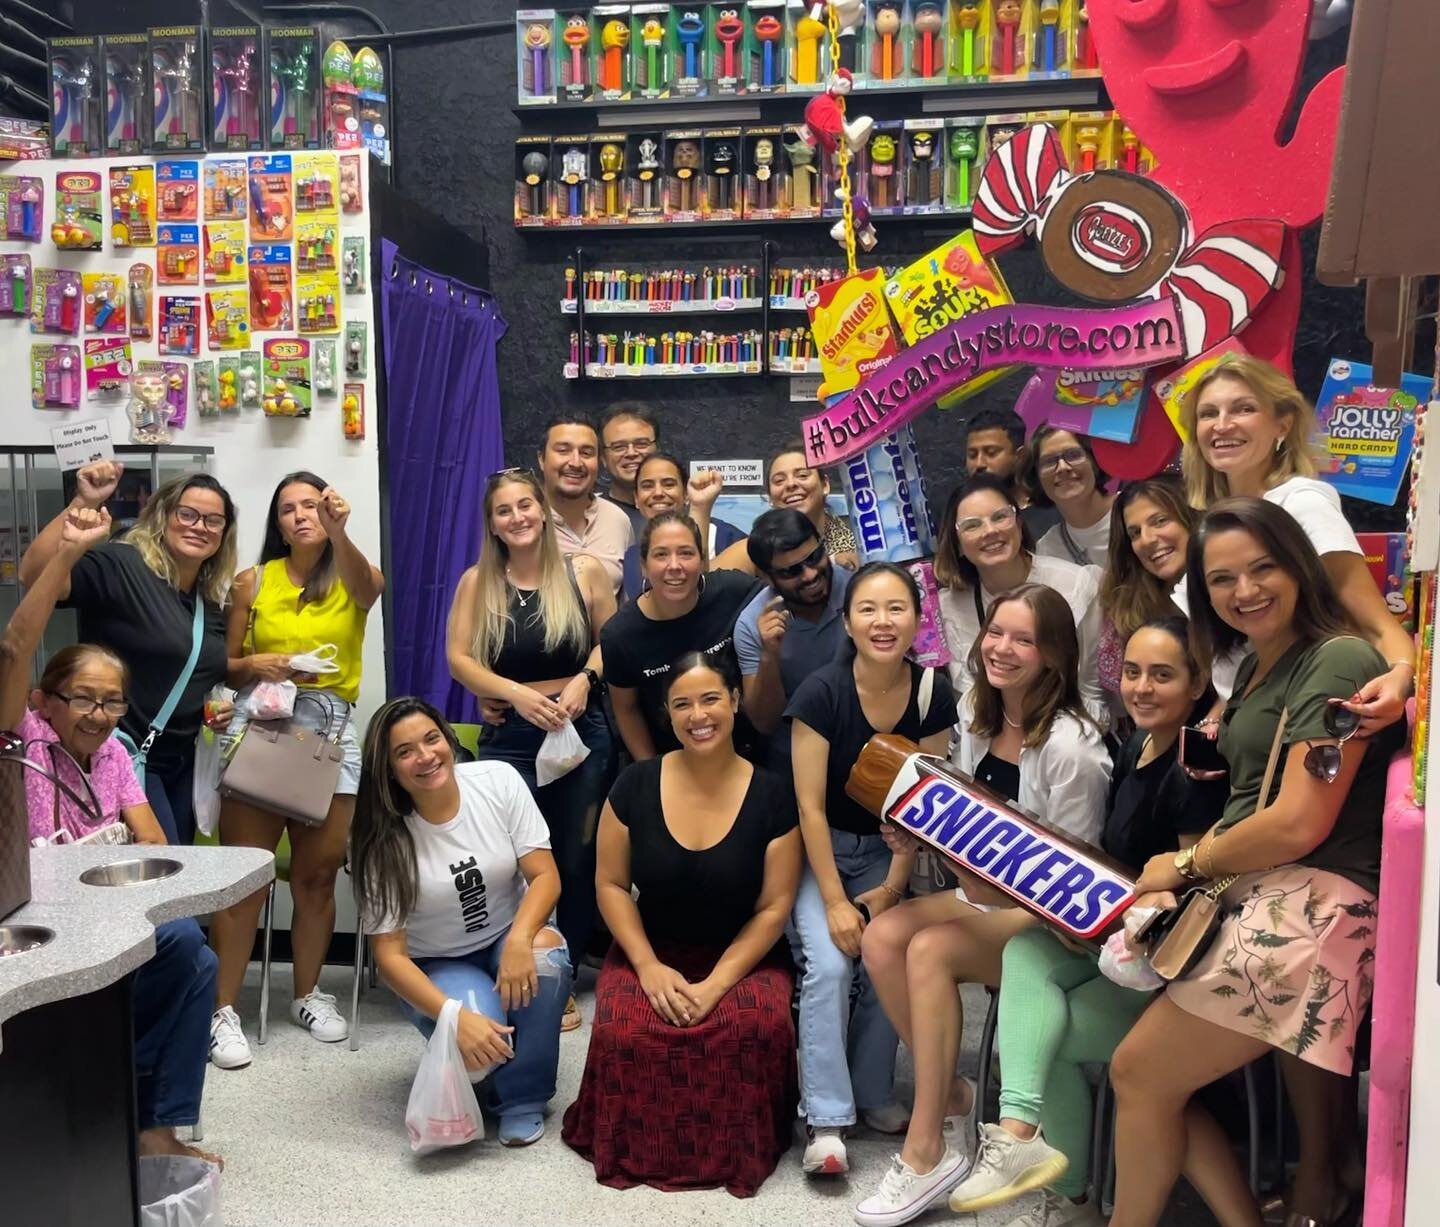 Our school year is off to a fantastic start! How is yours going?!
.
.
.
.
.
Special thank you to @bulkcandy for the amazing tour!